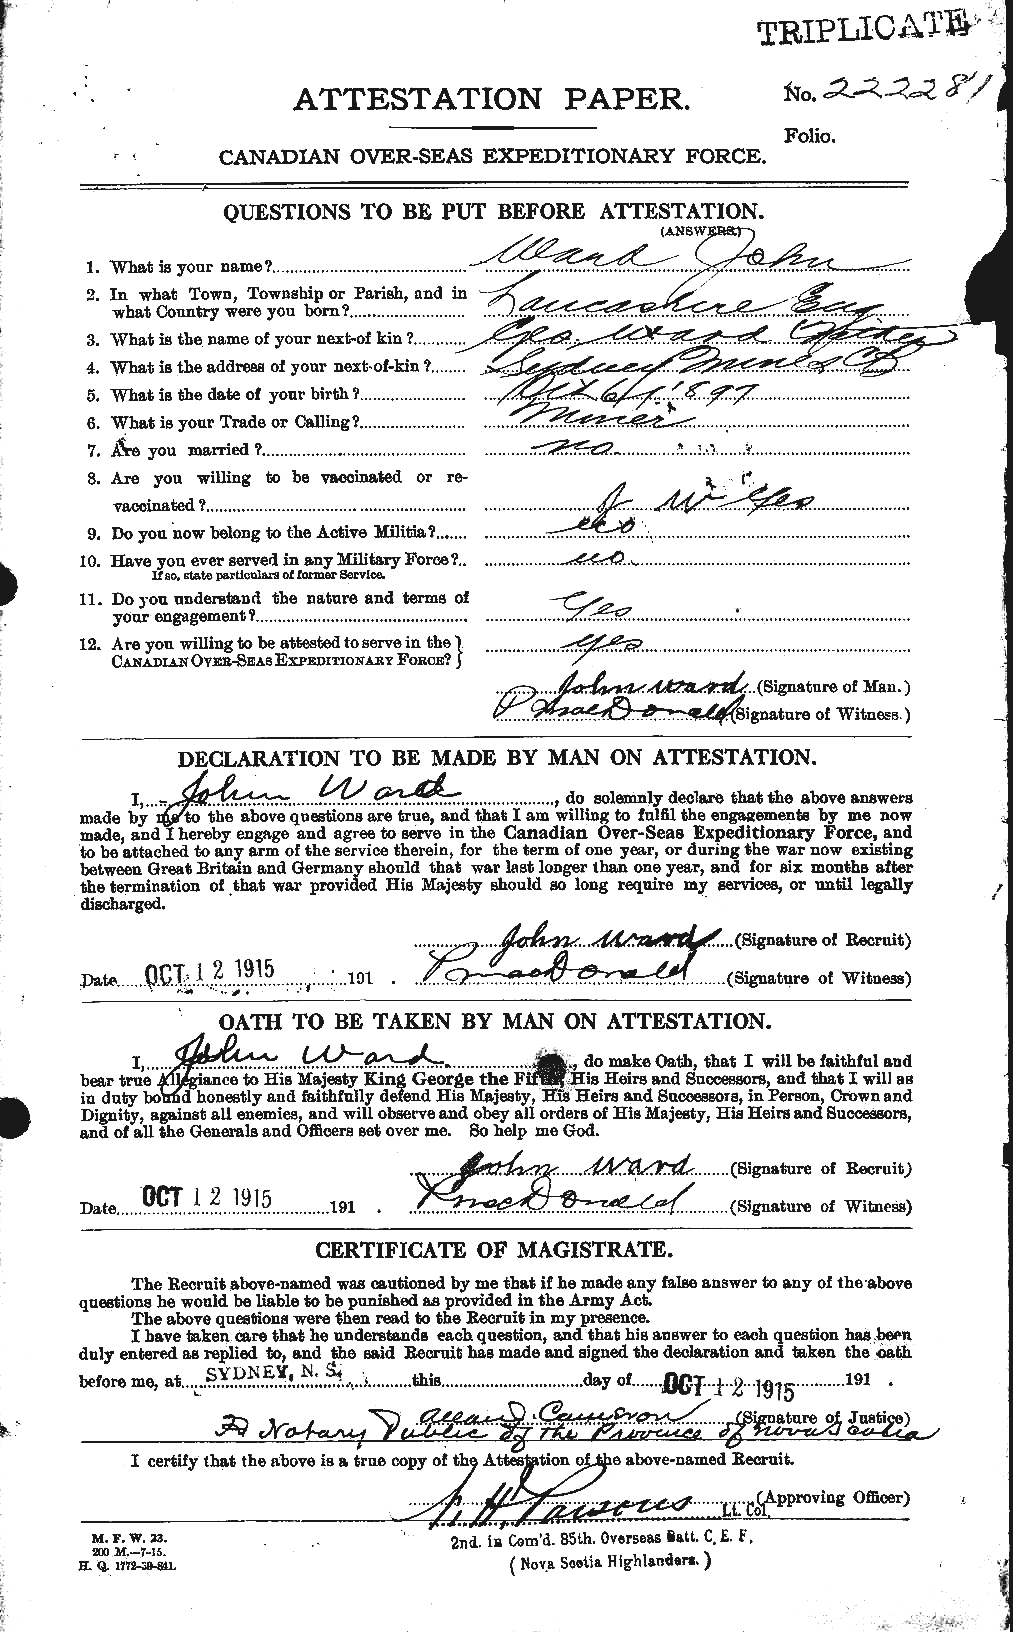 Personnel Records of the First World War - CEF 659495a